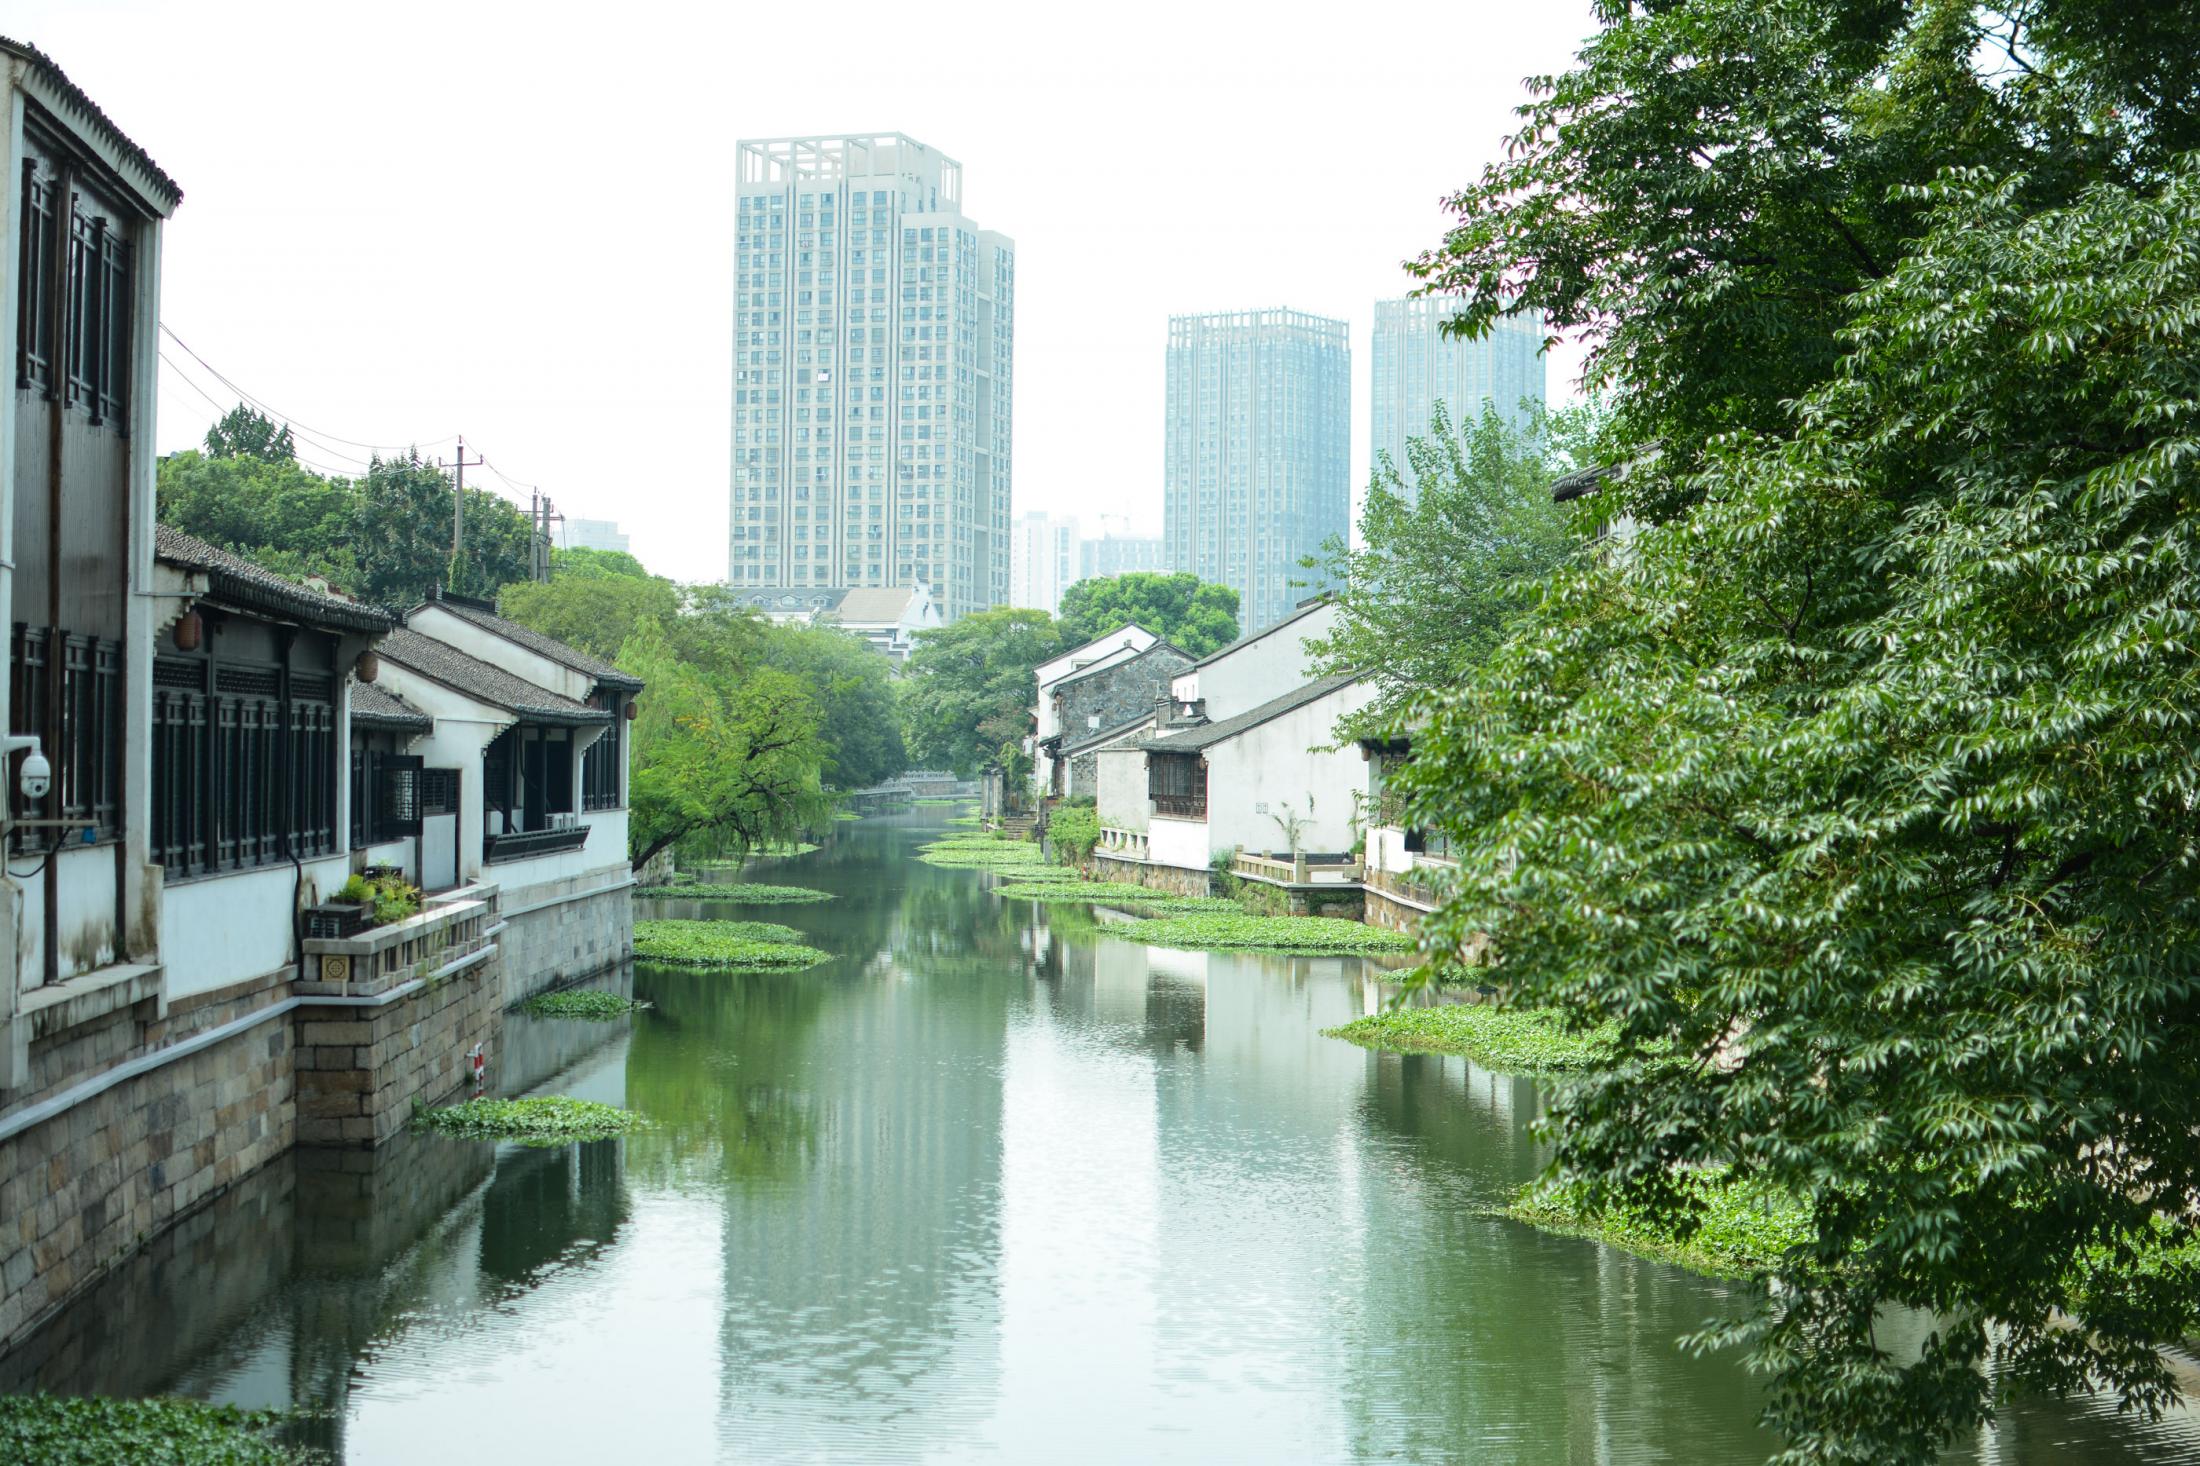 Qing Guo Alley is in the heart of Changzhou, home to some of the oldest canals in China.